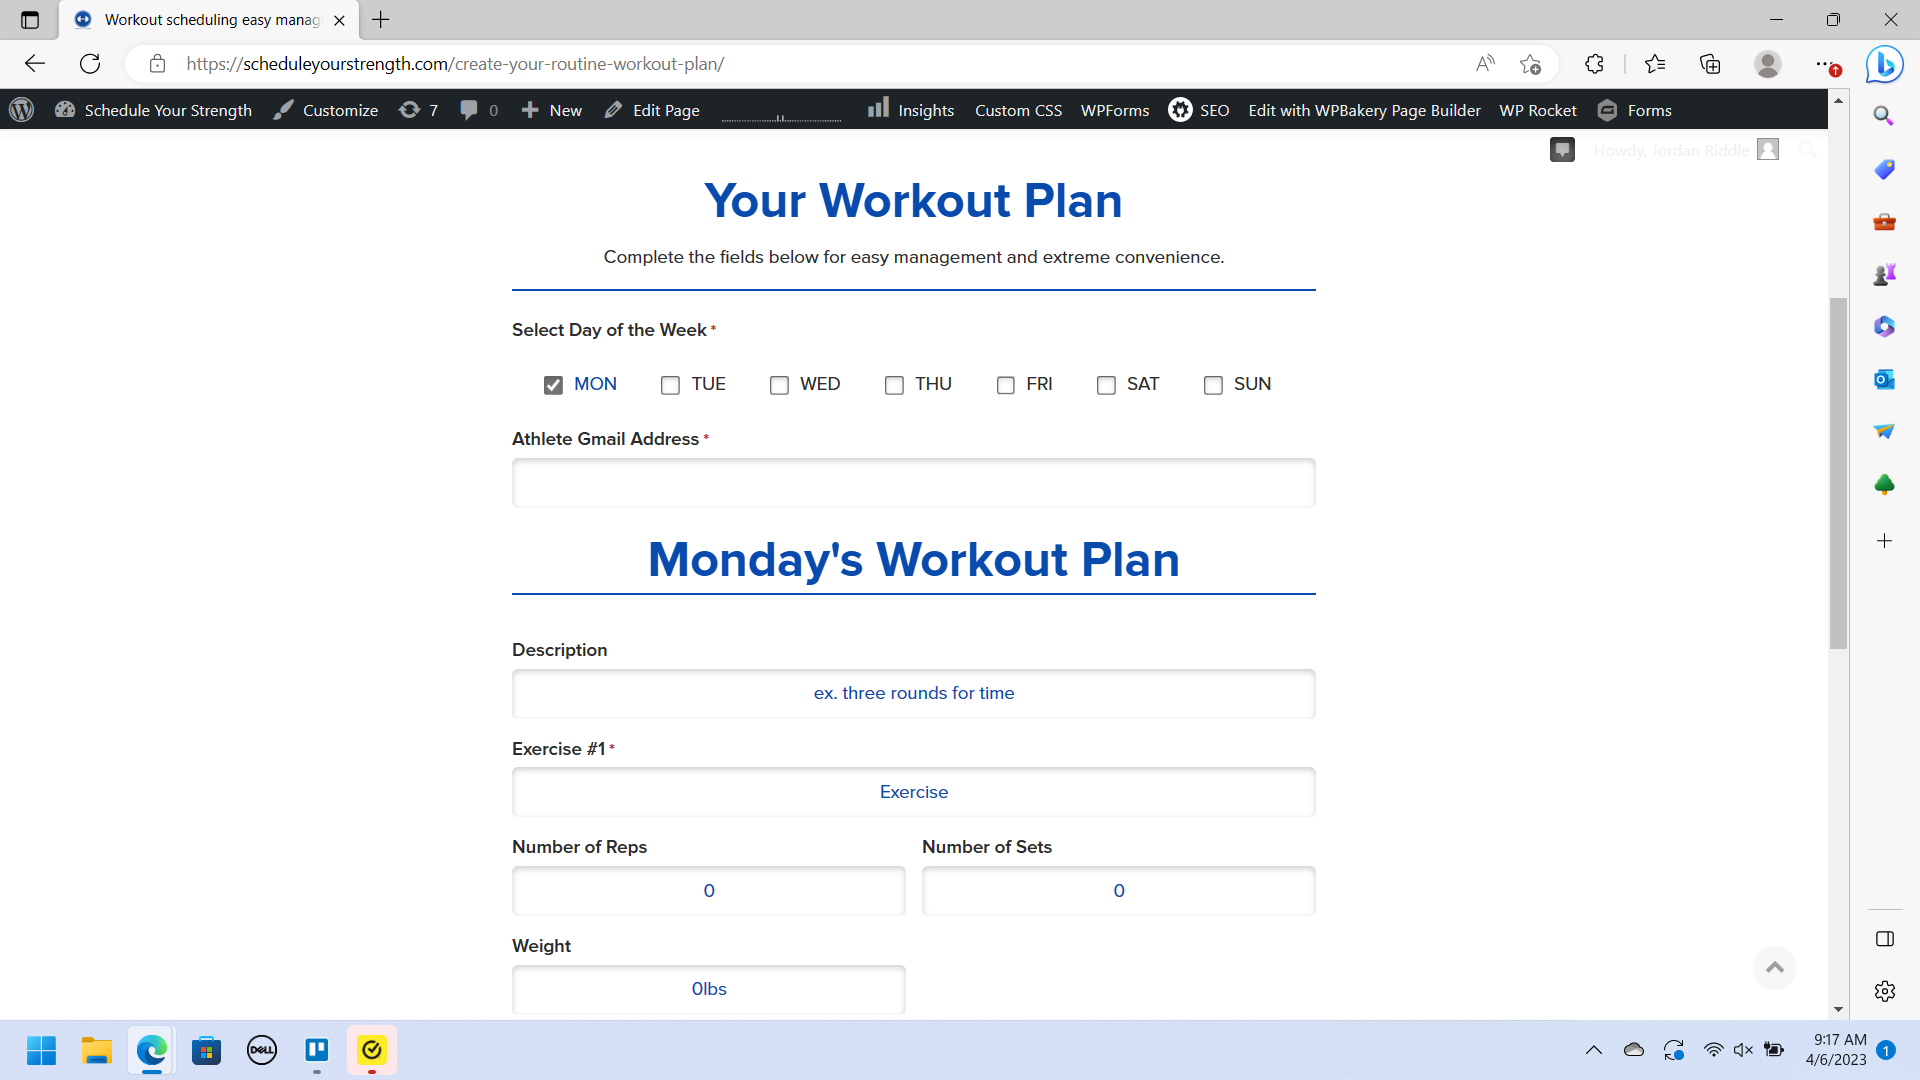 Easy custom data entry through a simple form, tailored for fitness